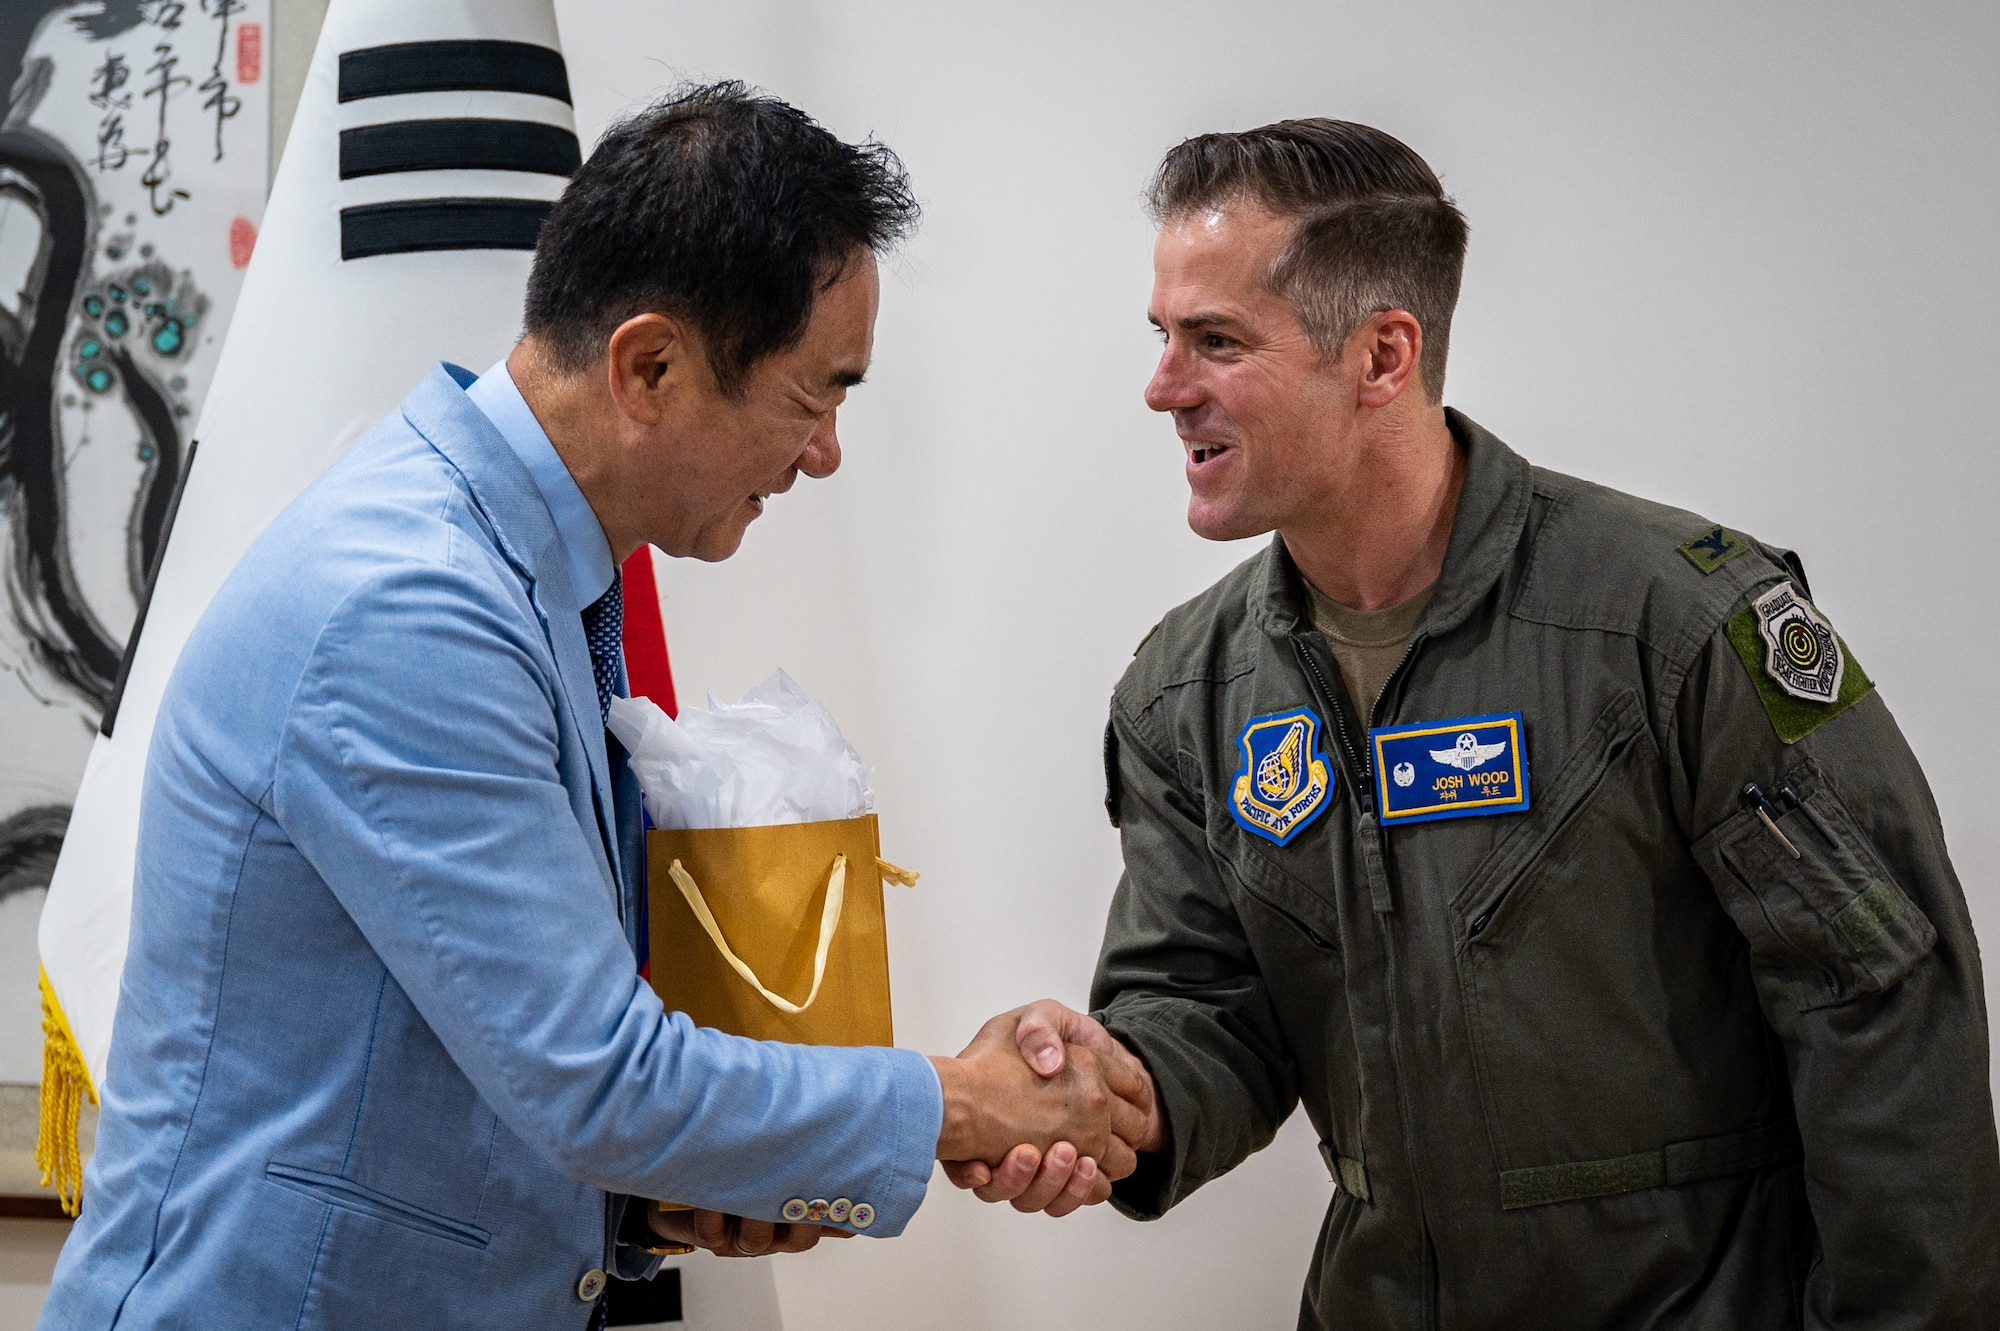 U.S. Air Force Col. Joshua Wood, right, 51st Fighter Wing Commander, presents Mr. Jung, Jang Seon, left, Pyeongtaek City mayor, with a gift at Pyeongtaek City Hall, Republic of Korea, June 1, 2023. During a ceremony held at City Hall, Pyeongtaek City bestowed honorary citizenship upon Wood and his wife. (U.S. Air Force photo by Senior Airman Thomas Sjoberg)